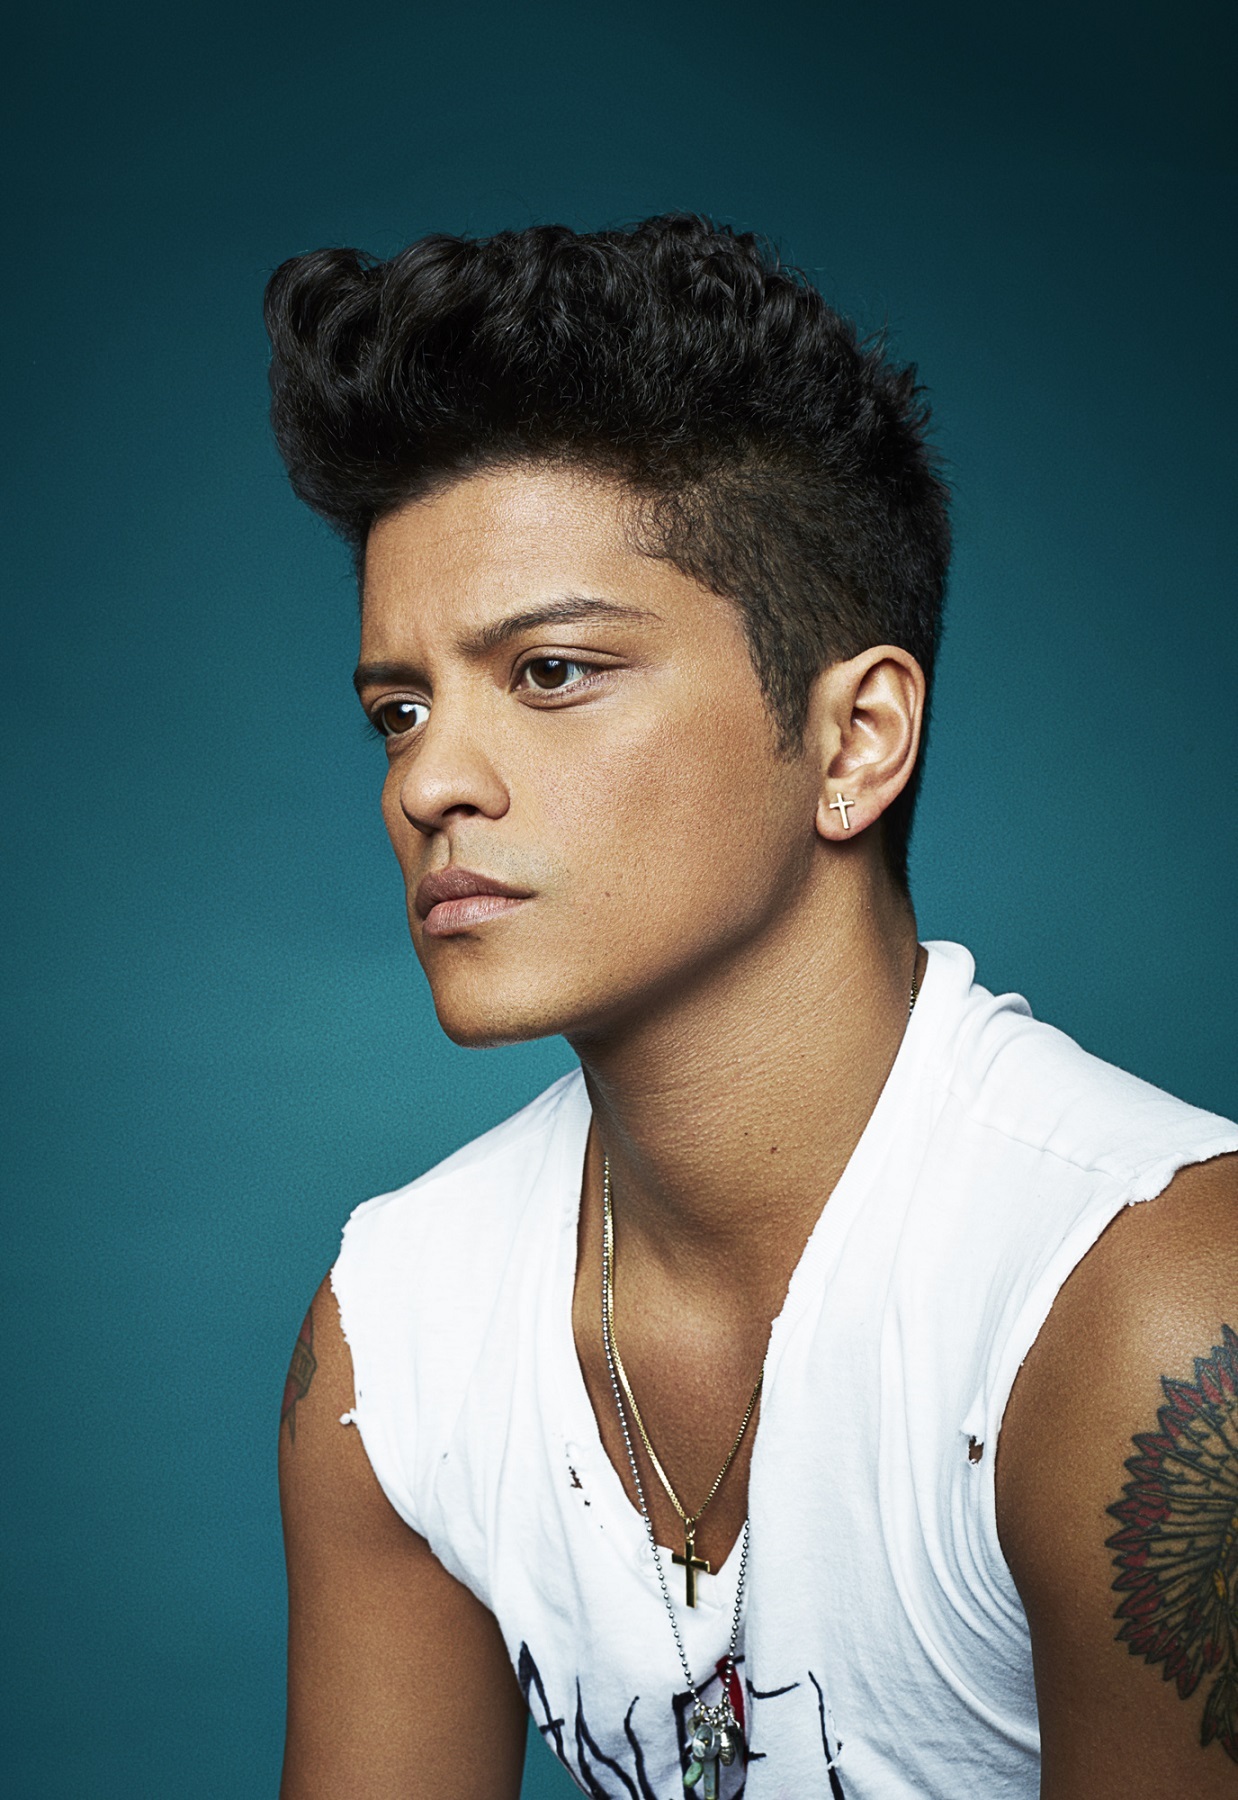 "Phenomenon" Bruno Mars causes fever in the music industry after 4 years of absence - 2